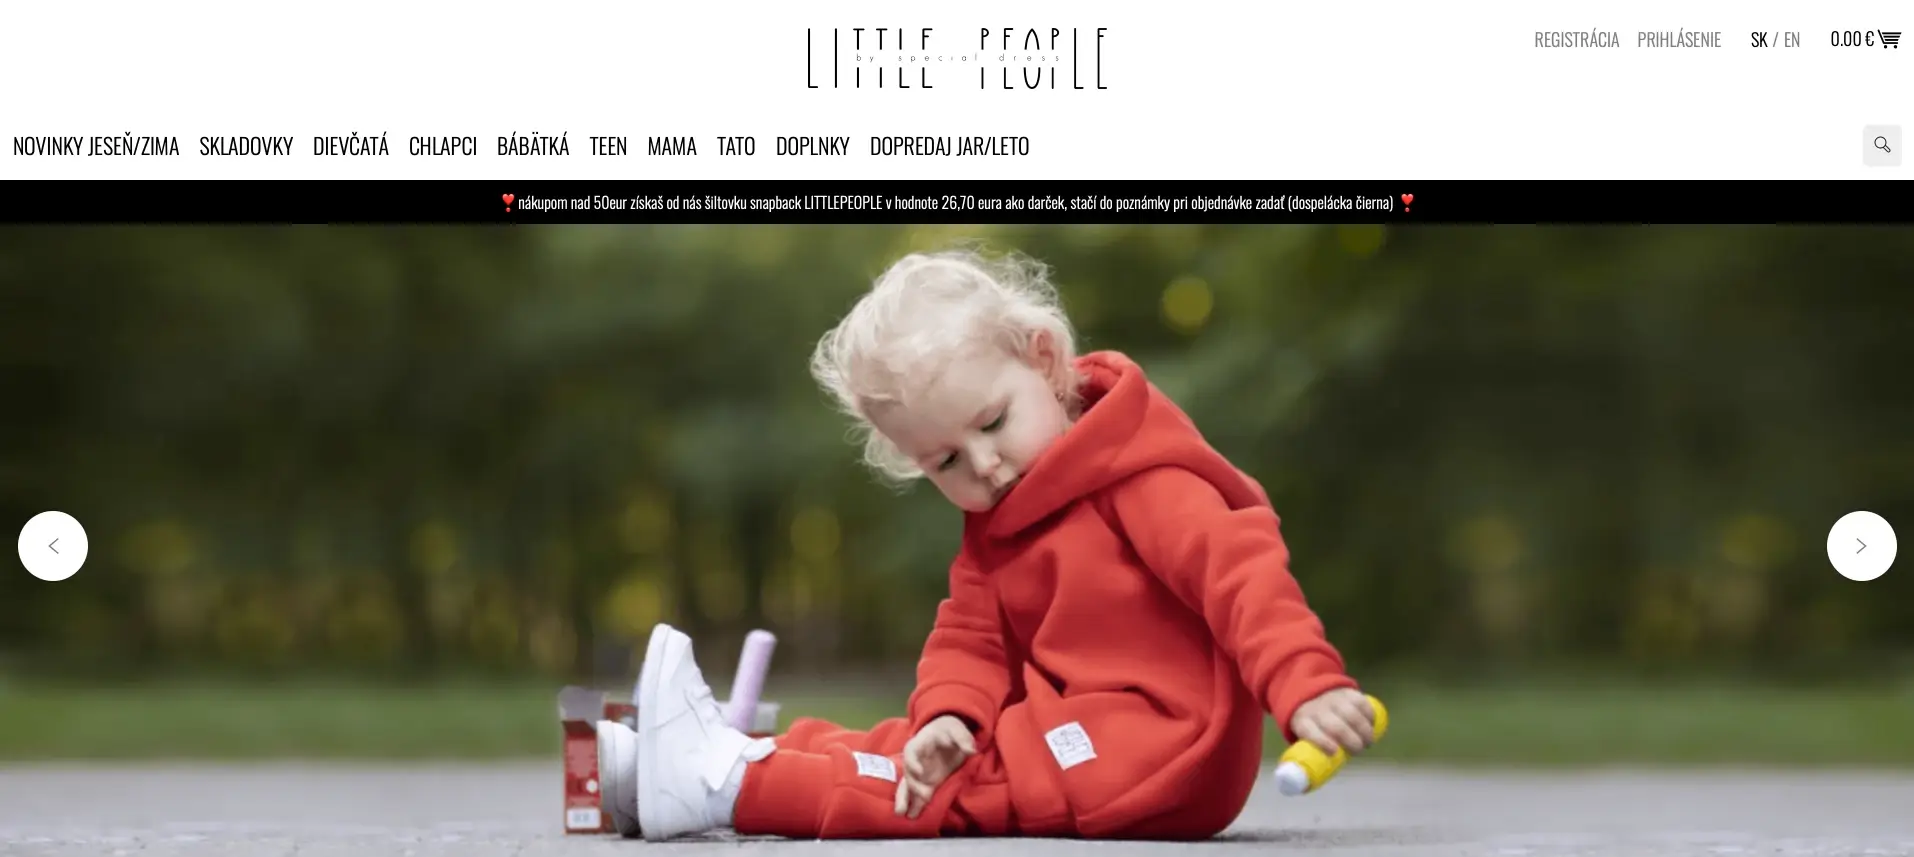 Littlepeople - Little items for our kids and whole family